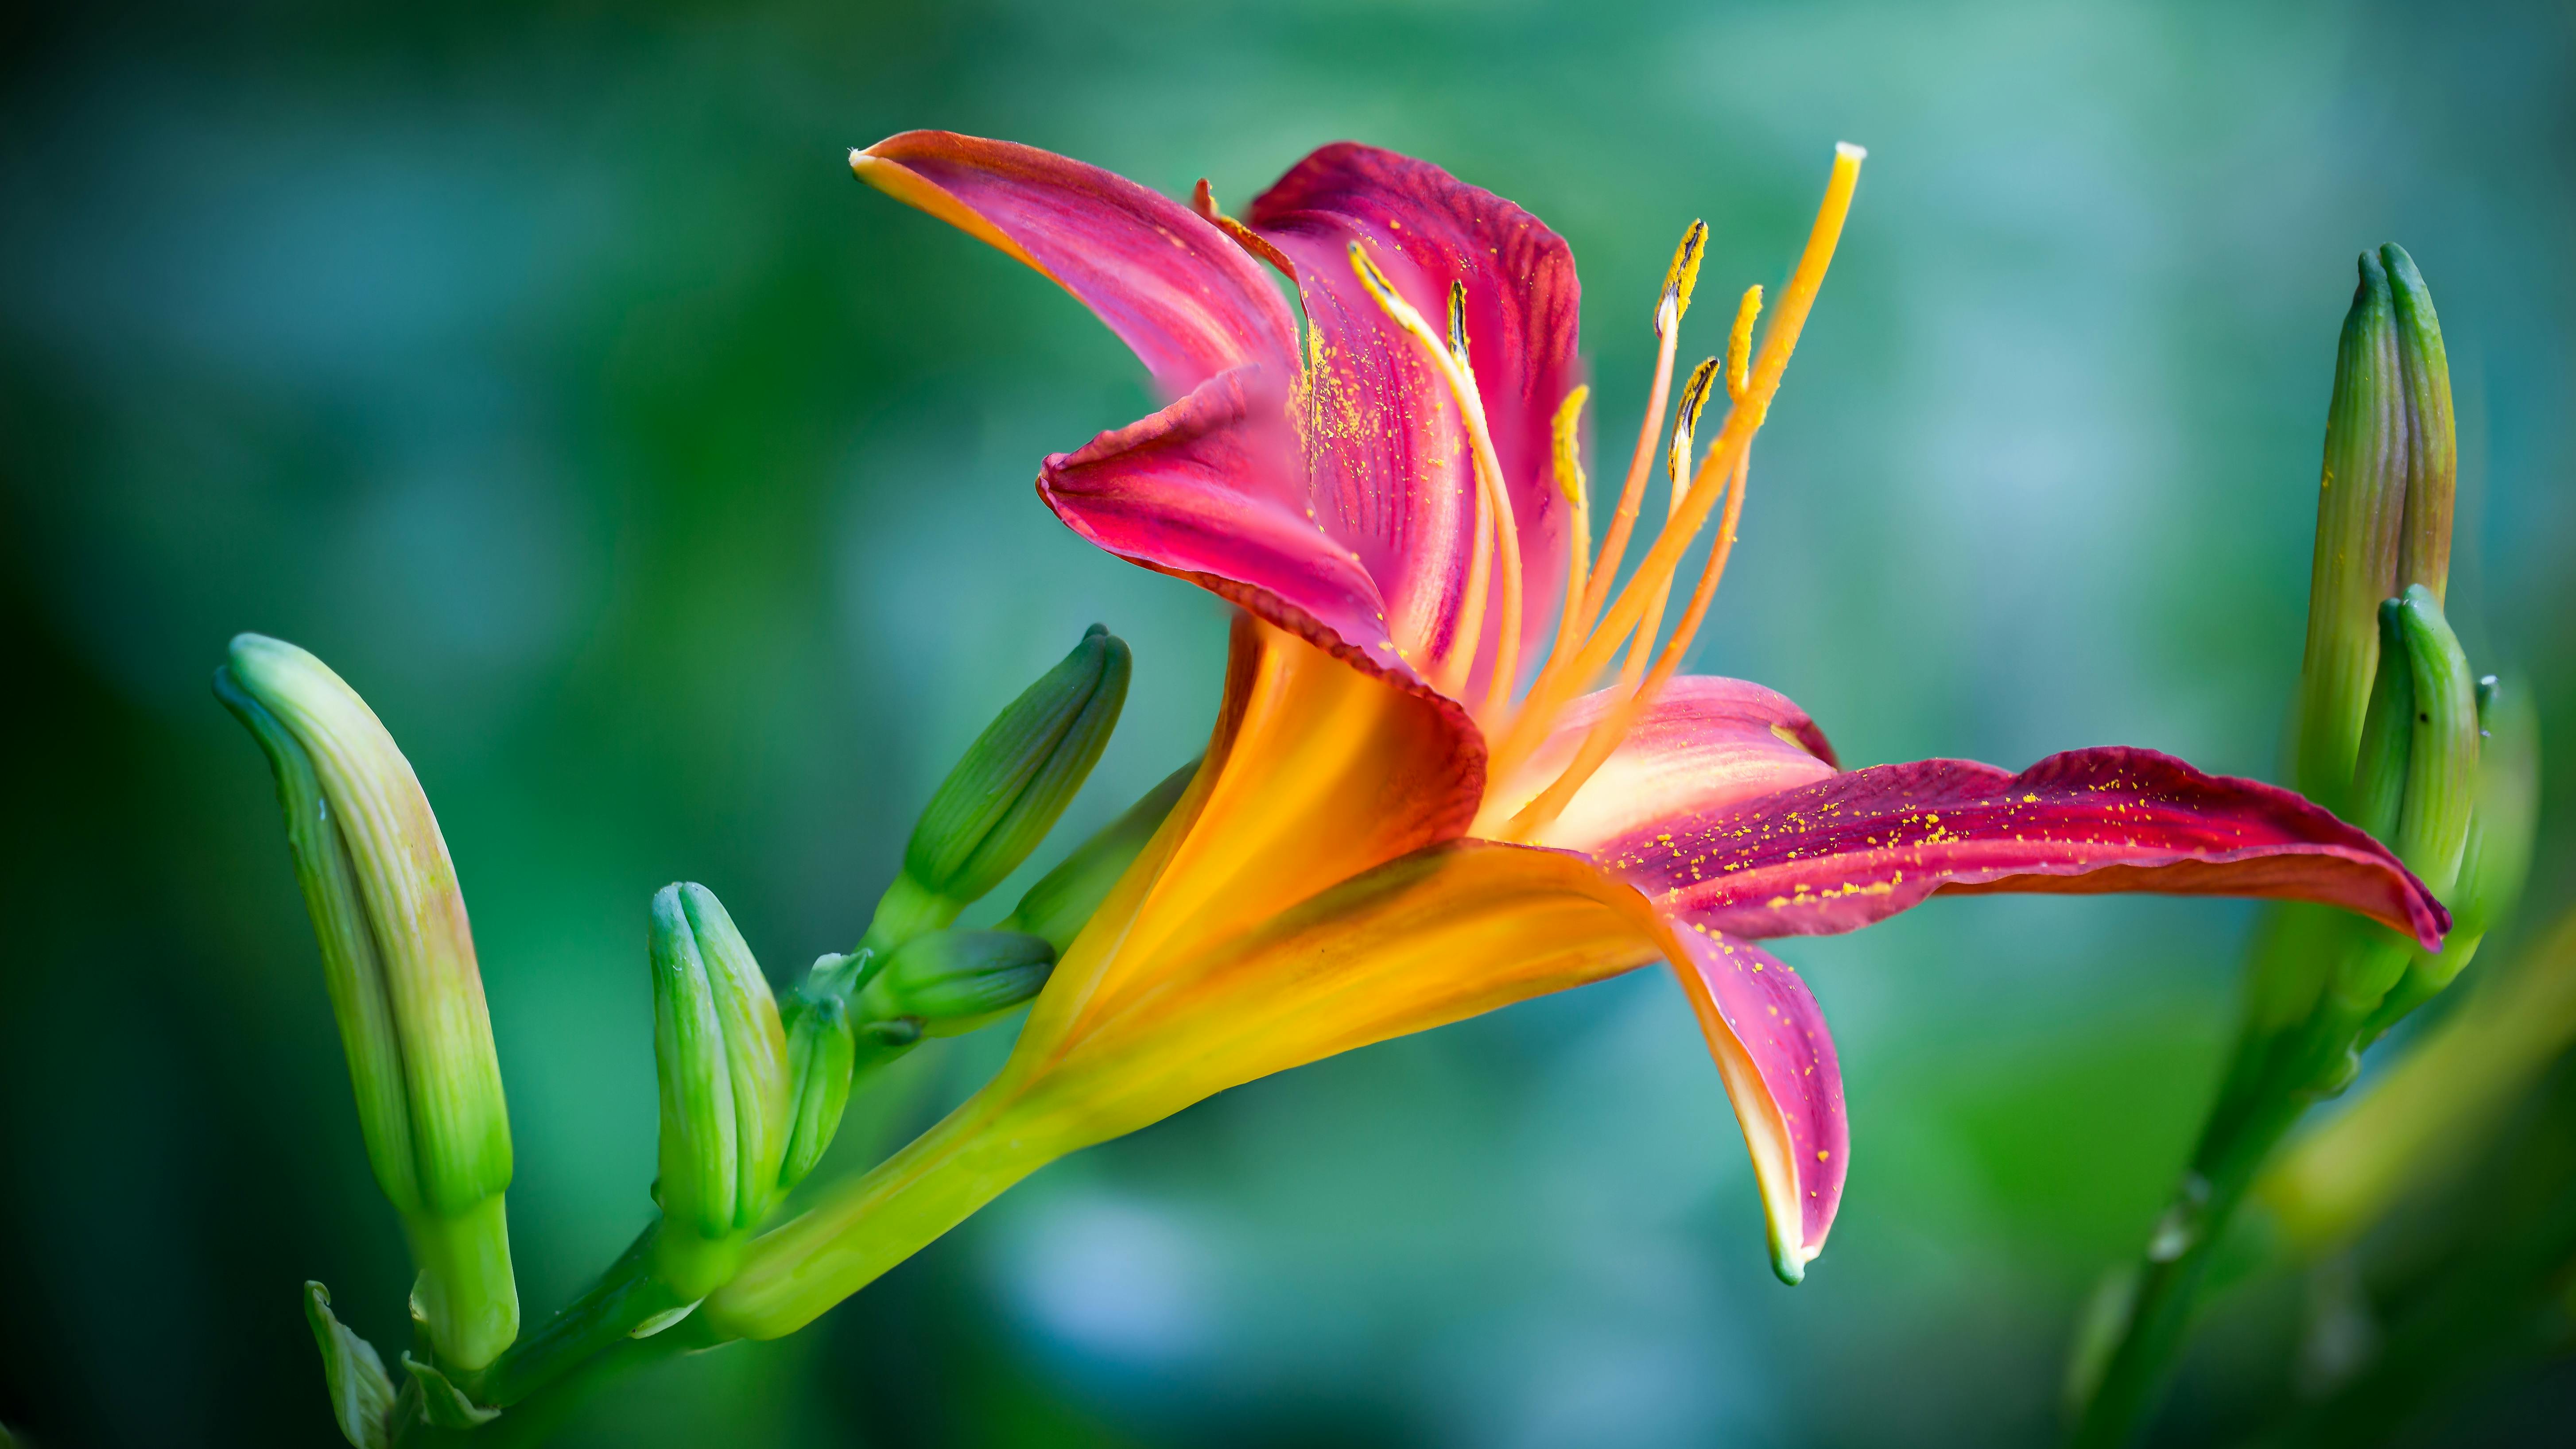 Pink and Yellow Lily Flower in Closeup Photo u00b7 Free Stock Photo